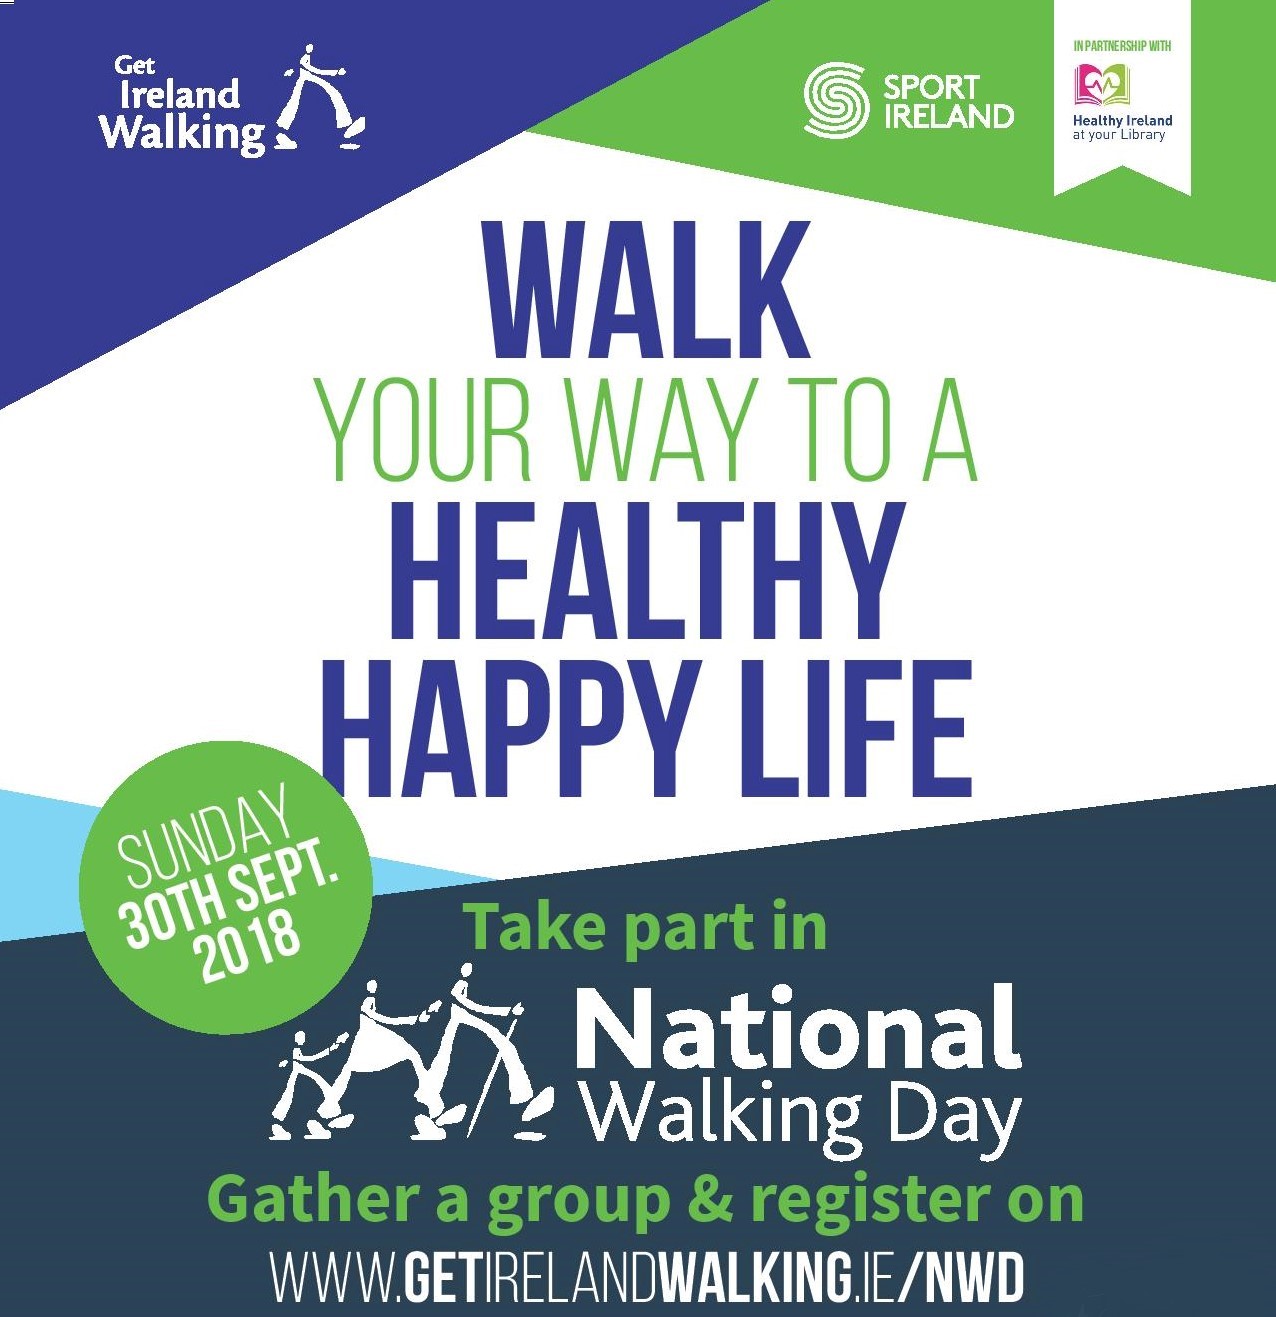 Promotional image for National Walking Day 2018 by Get Ireland Walking